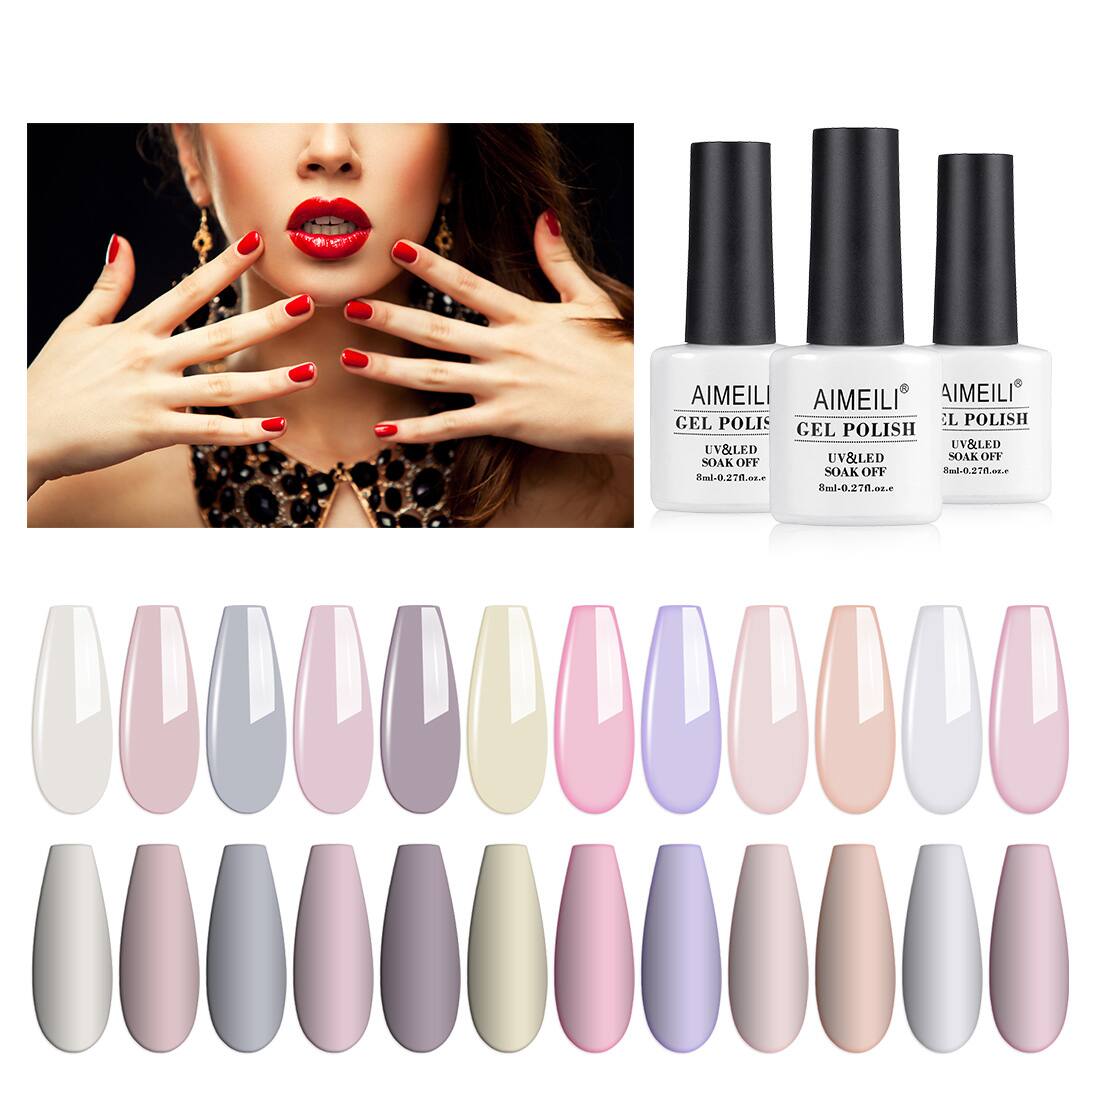 AIMEILI Clear Color Gel Nail Polish Set Of 12pcs for - $11.39 + Free Shipping w/ Amazon Prime or Orders $25+